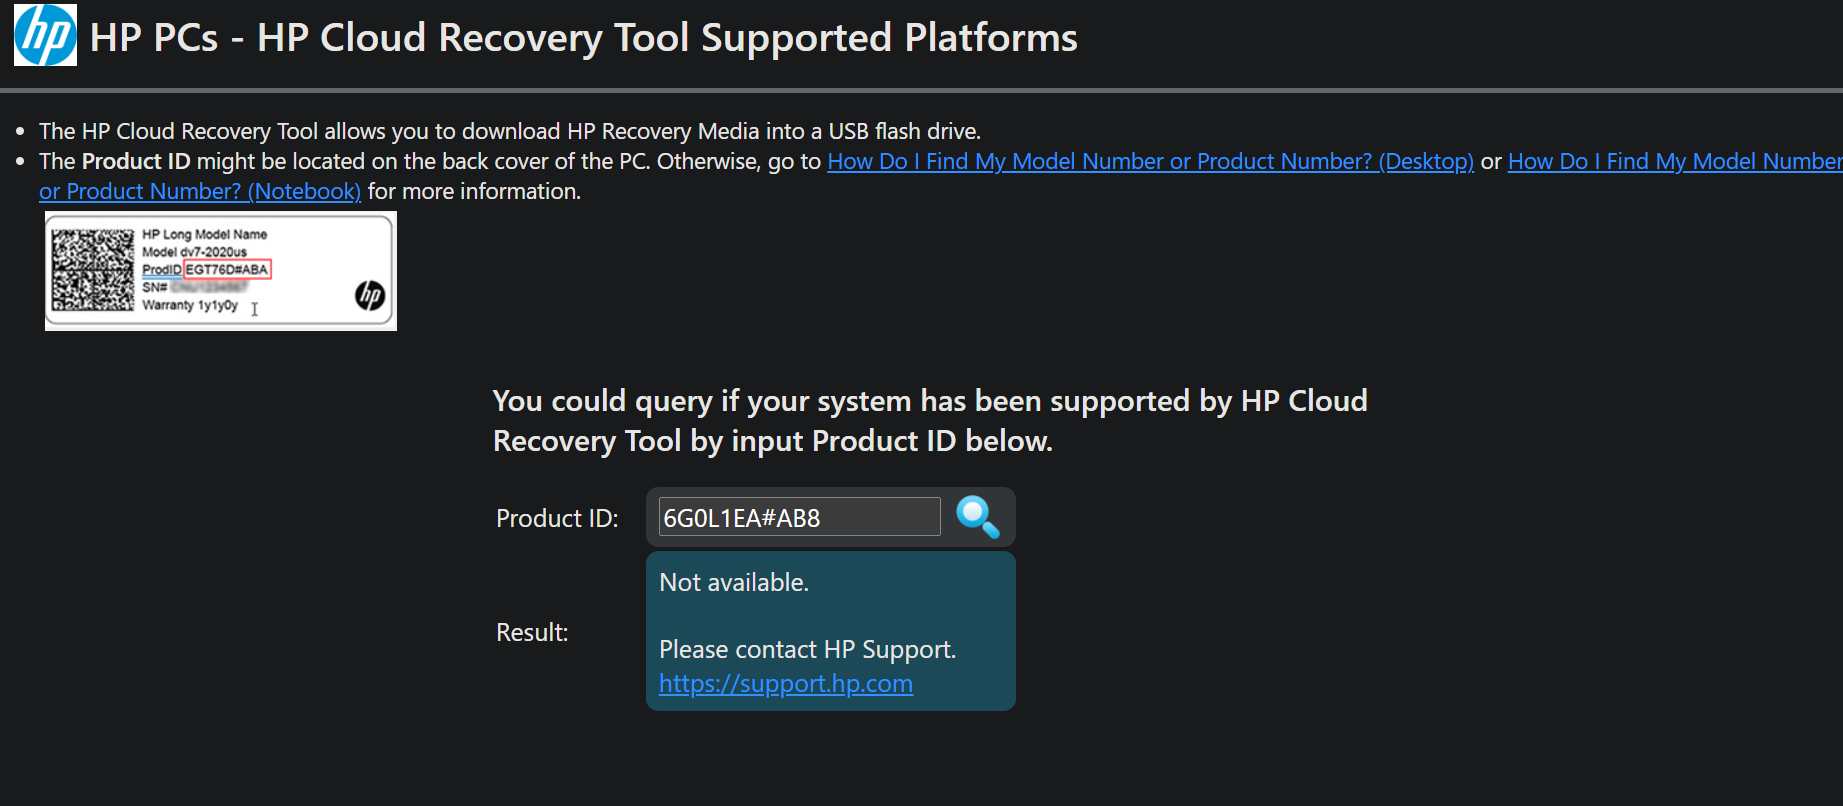 HP Cloud Recovery Tool can't find my product. - HP Support Community -  8871928